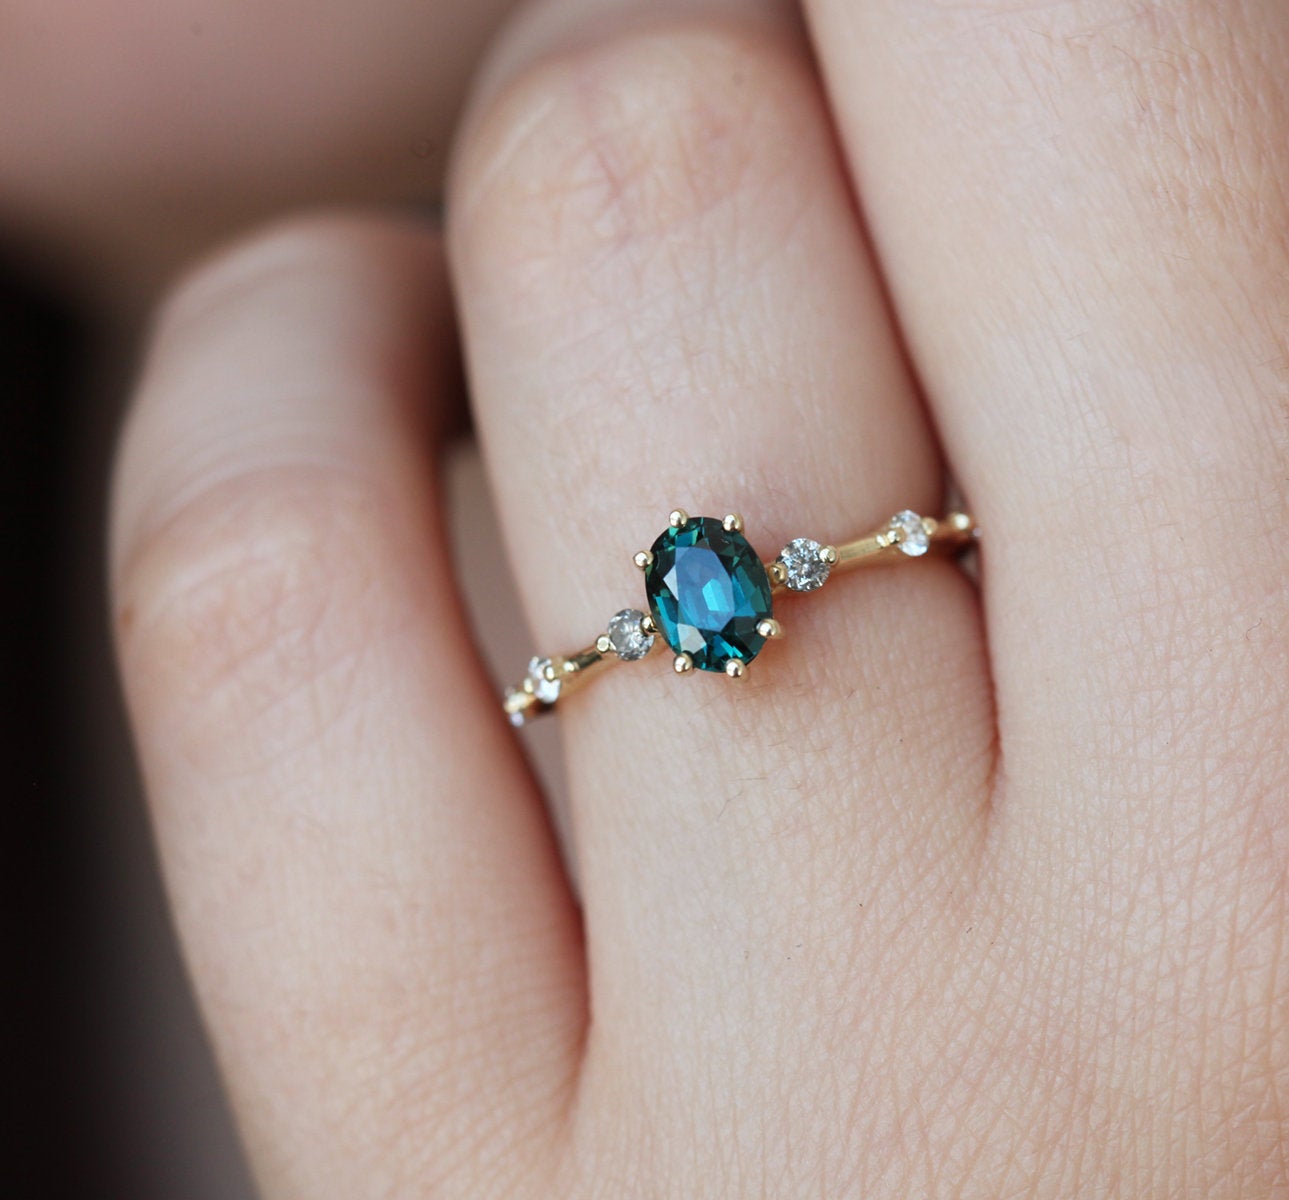 Teal Oval Alexandrite Ring with Side Round White and Salt & Pepper Diamonds